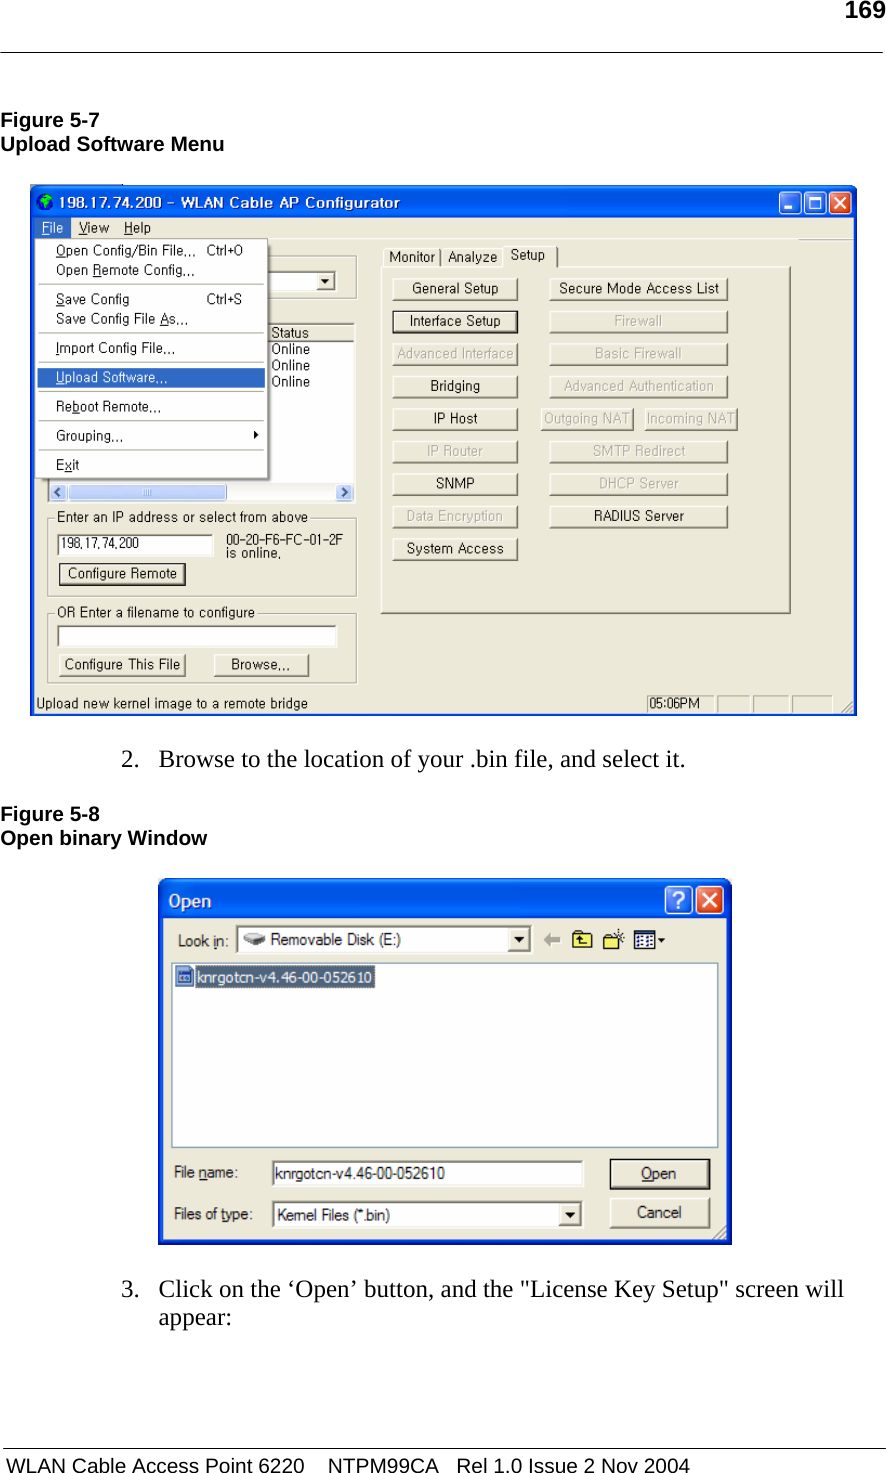   169   WLAN Cable Access Point 6220    NTPM99CA   Rel 1.0 Issue 2 Nov 2004 Figure 5-7 Upload Software Menu    2. Browse to the location of your .bin file, and select it.  Figure 5-8 Open binary Window   3. Click on the ‘Open’ button, and the &quot;License Key Setup&quot; screen will appear:  